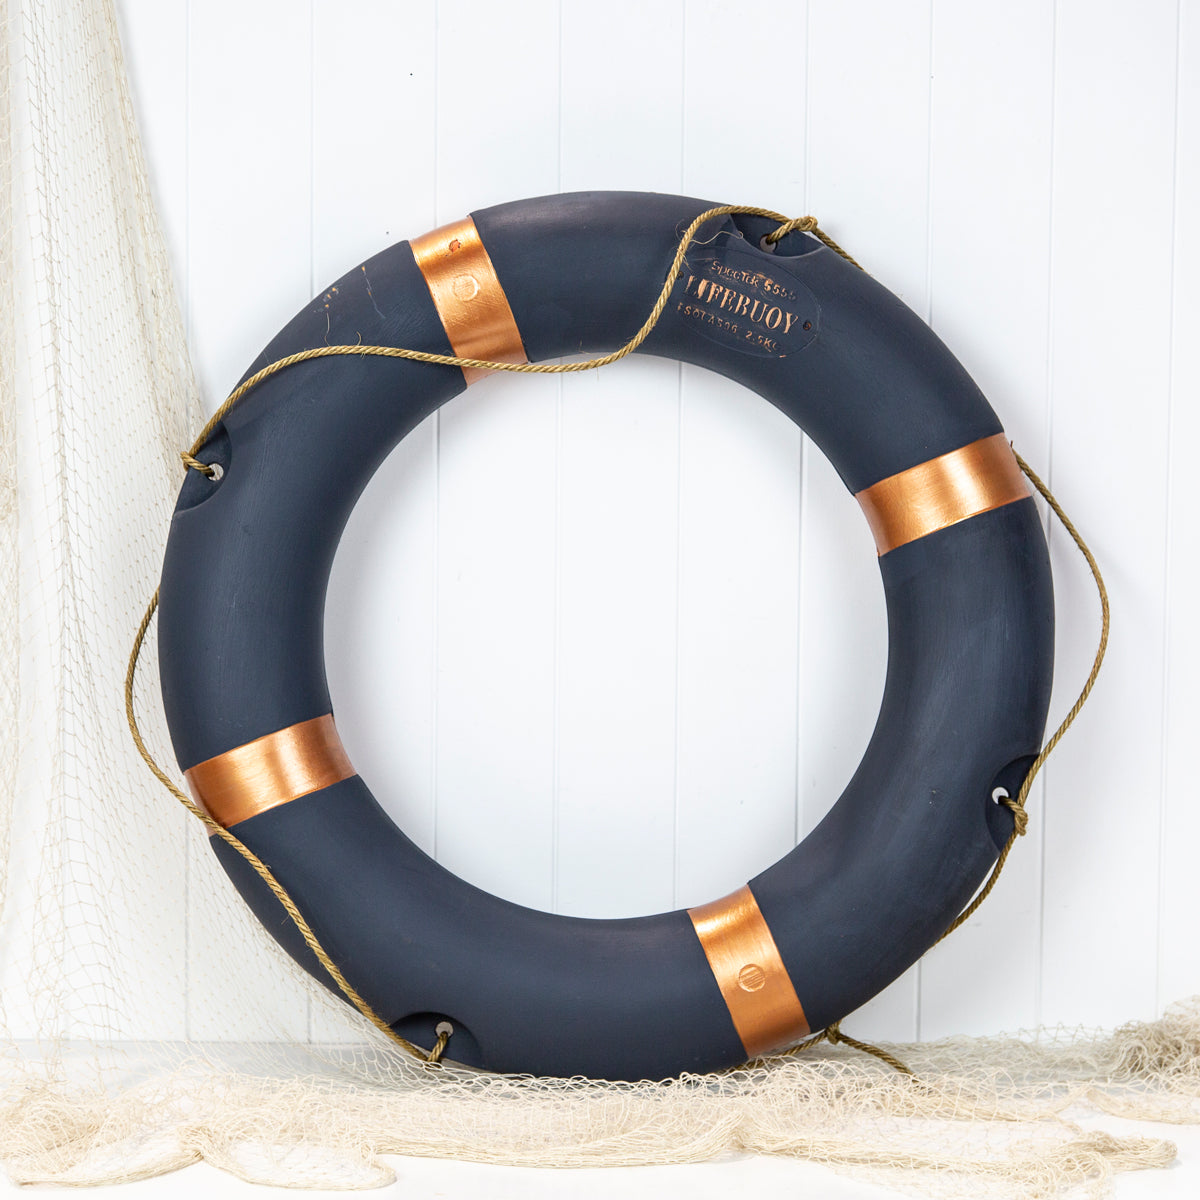 Cheap Welcome Aboard Cloth Life Ring Navy Accent Nautical Decor New Lifebuoy  Decoration | Joom